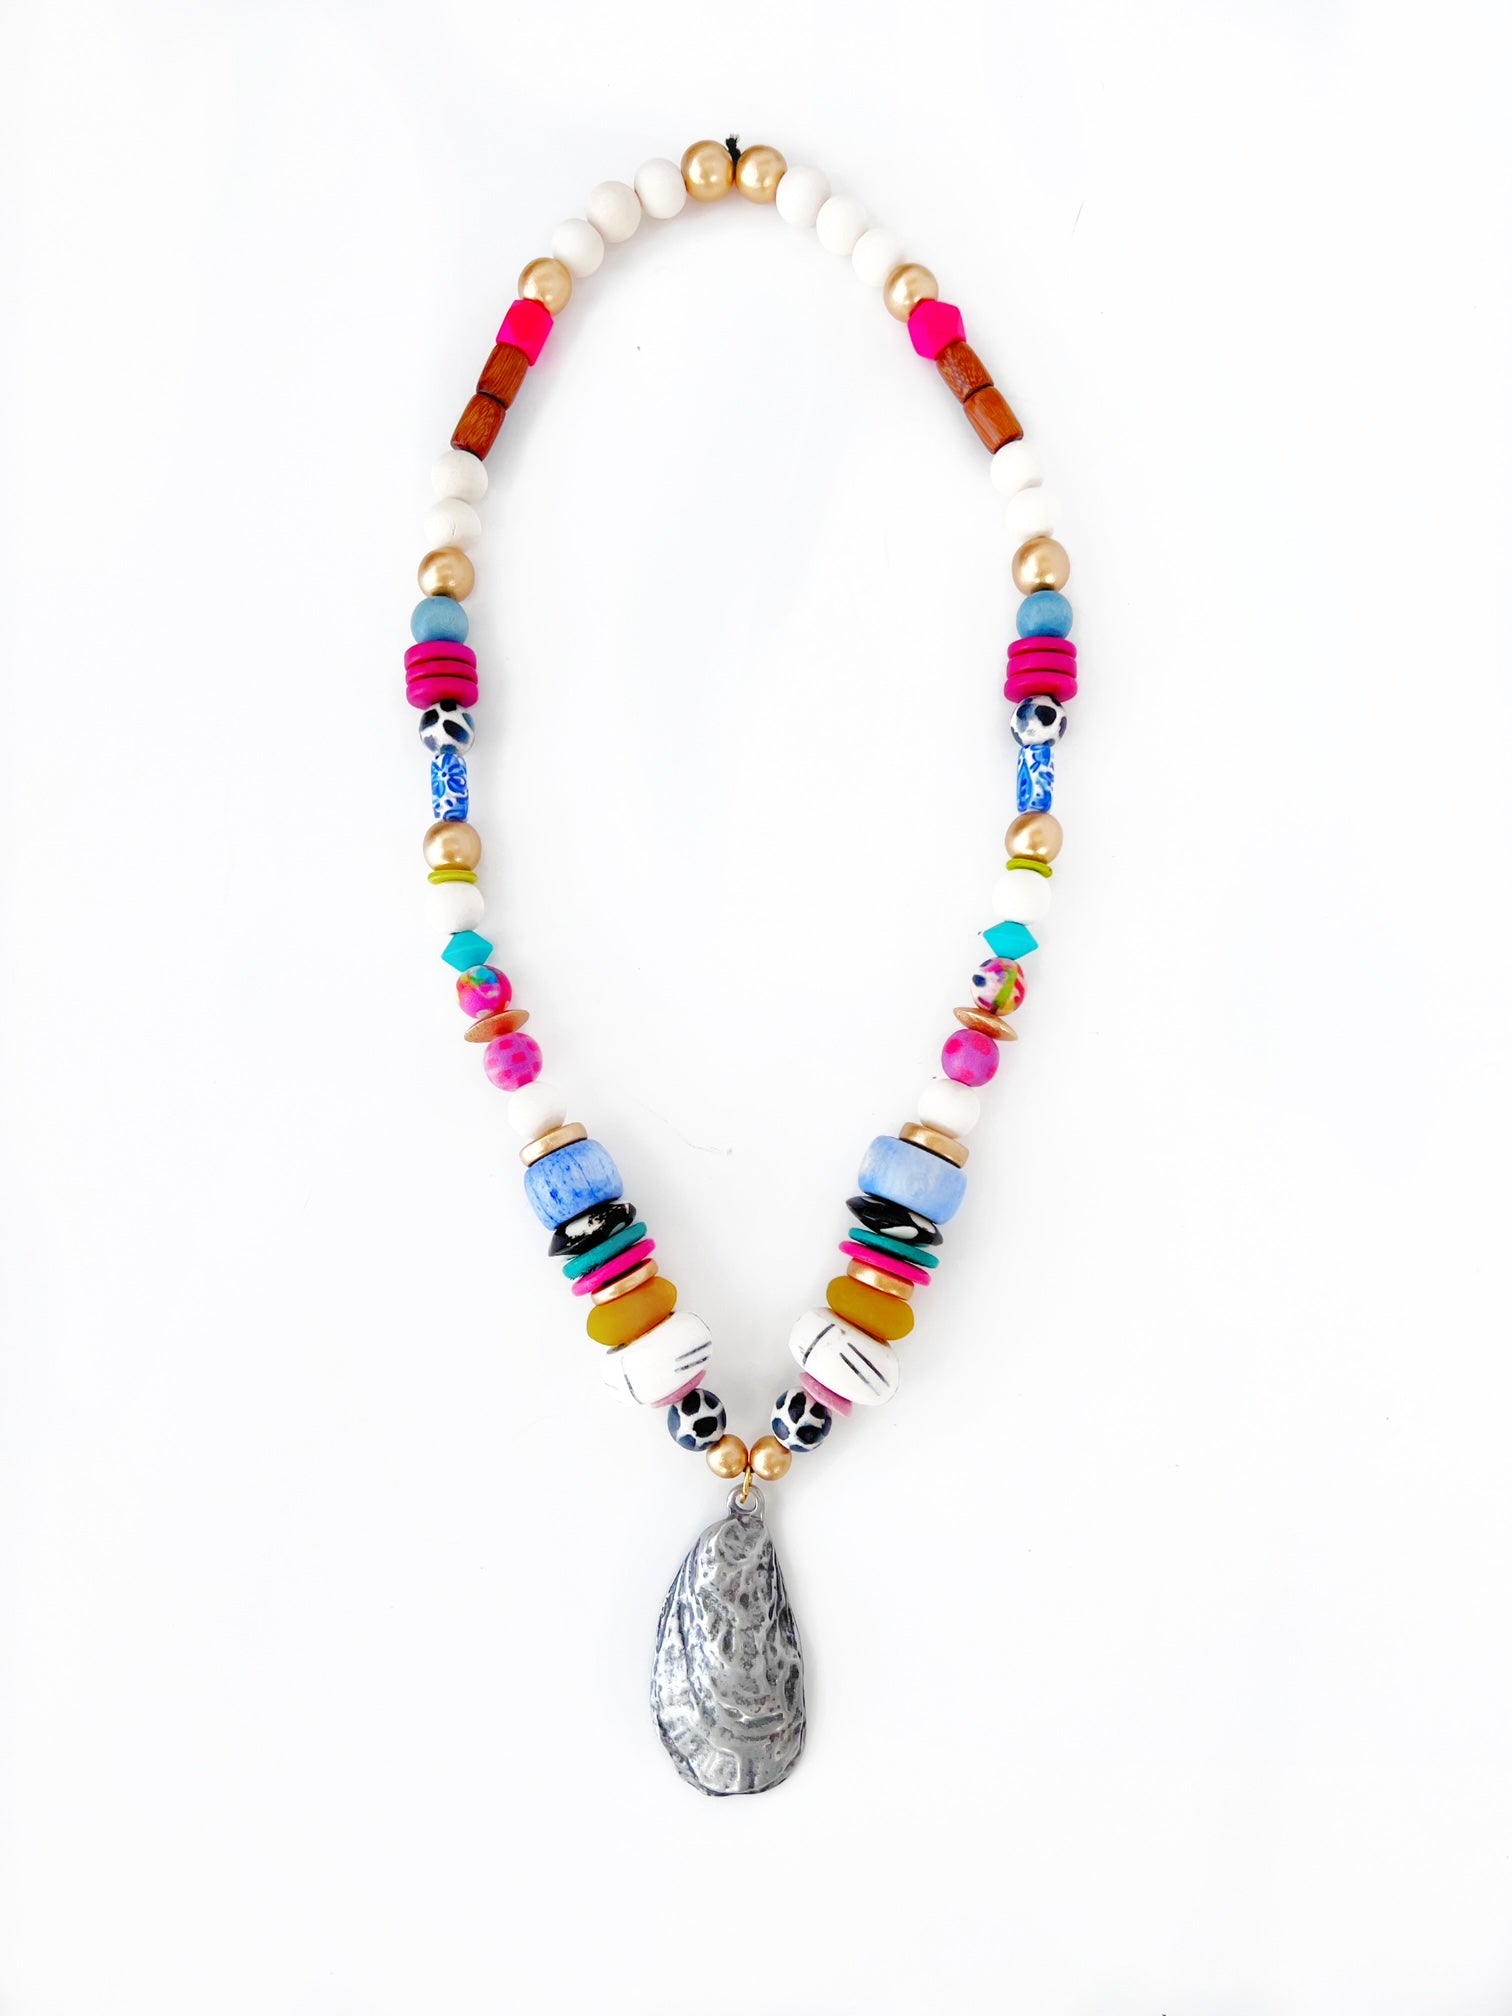 Beaded Pewter Oyster Shell Pendant Necklace - Bright Color Mix